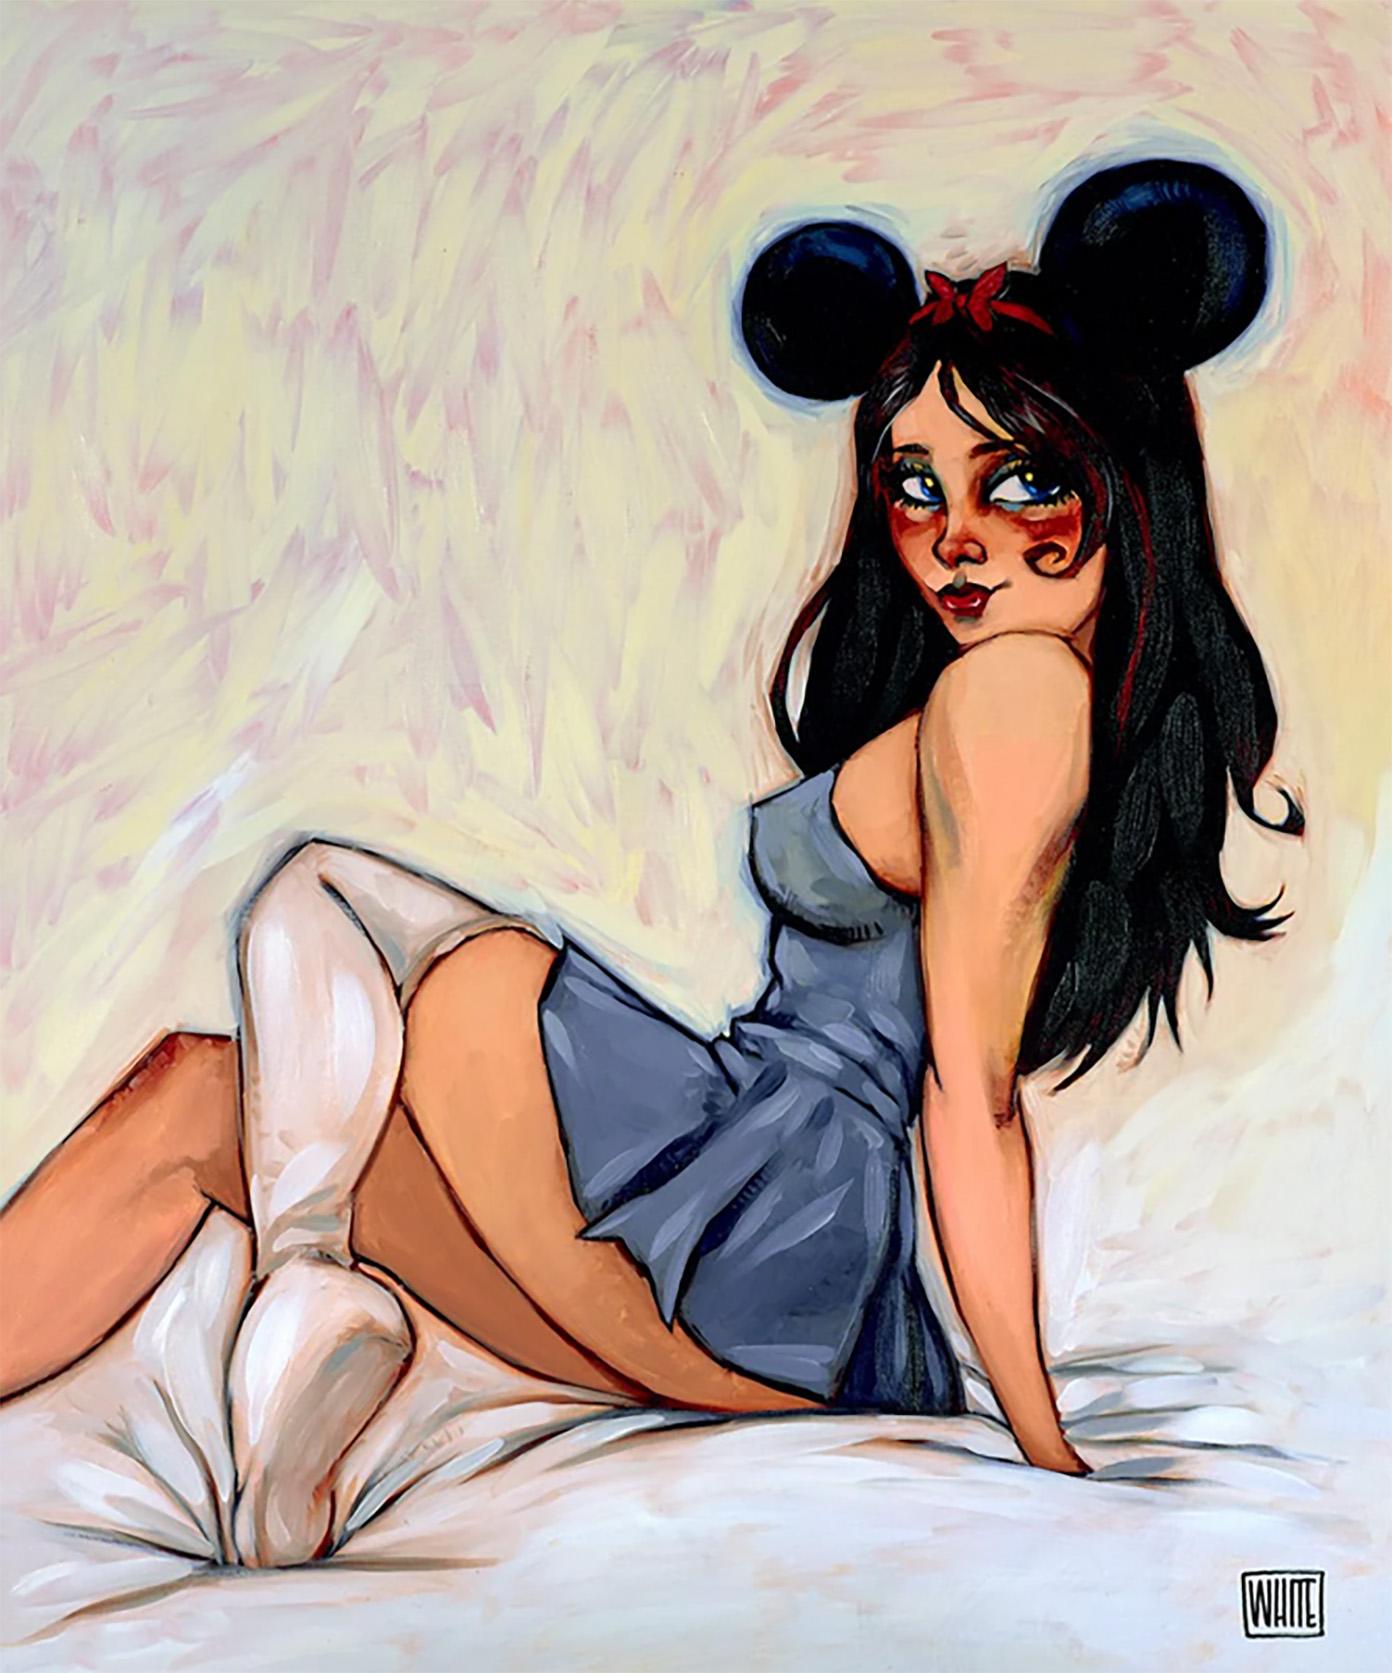 Todd White Figurative Print - My Mouseketeer